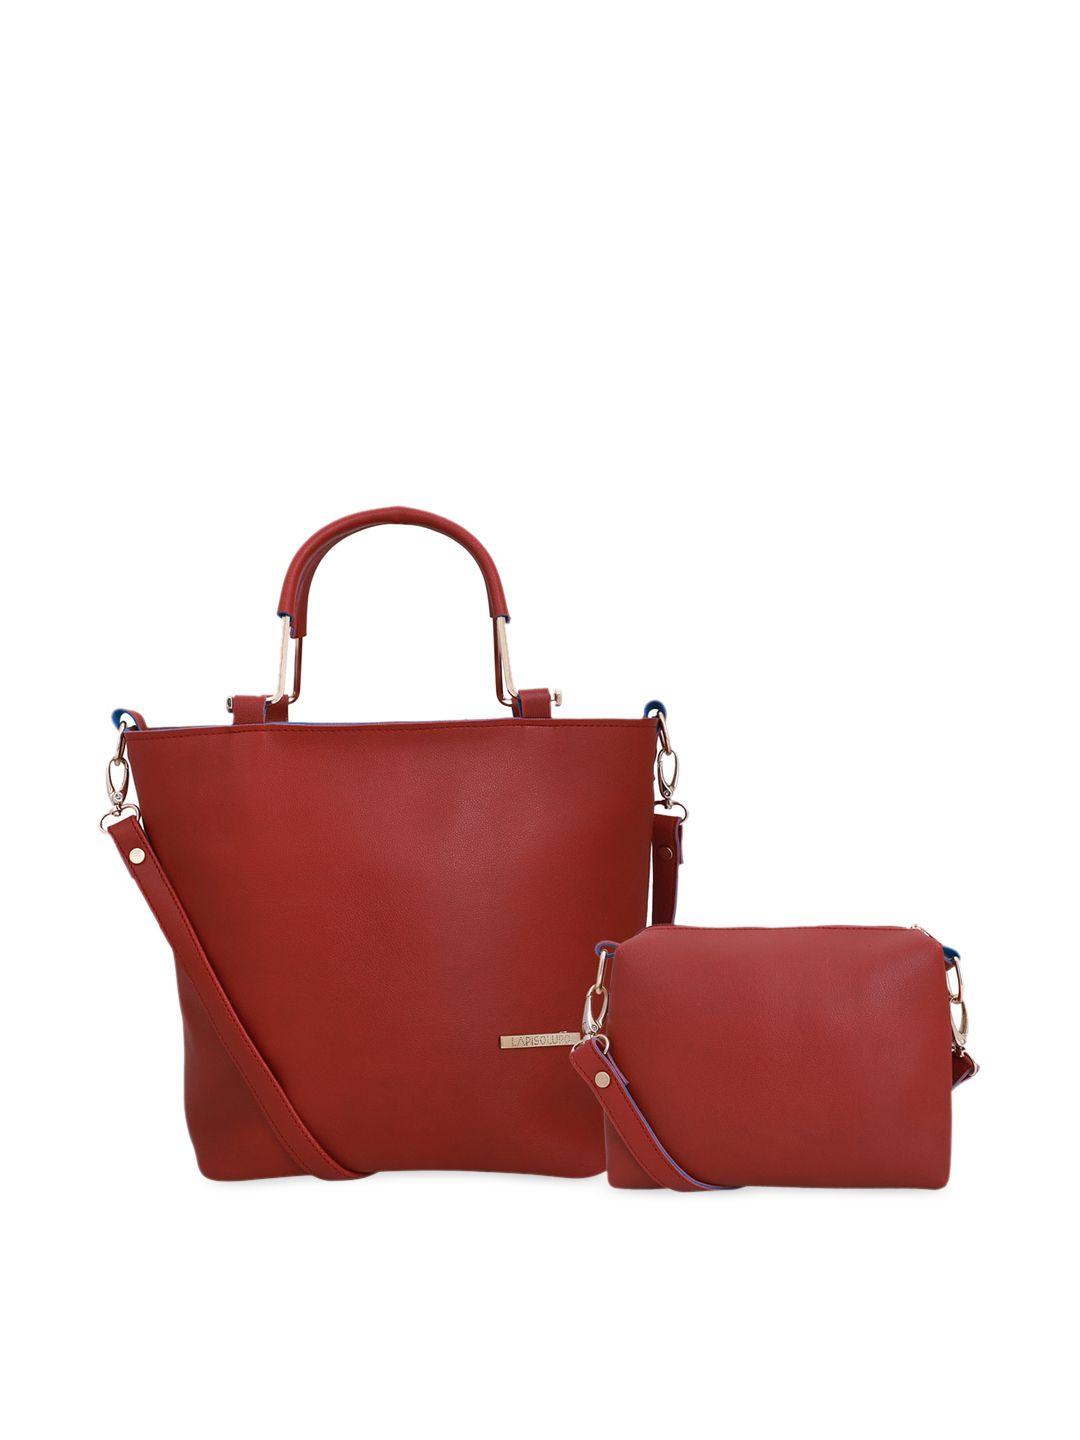 lapis o lupo red textured handheld bag with pouch